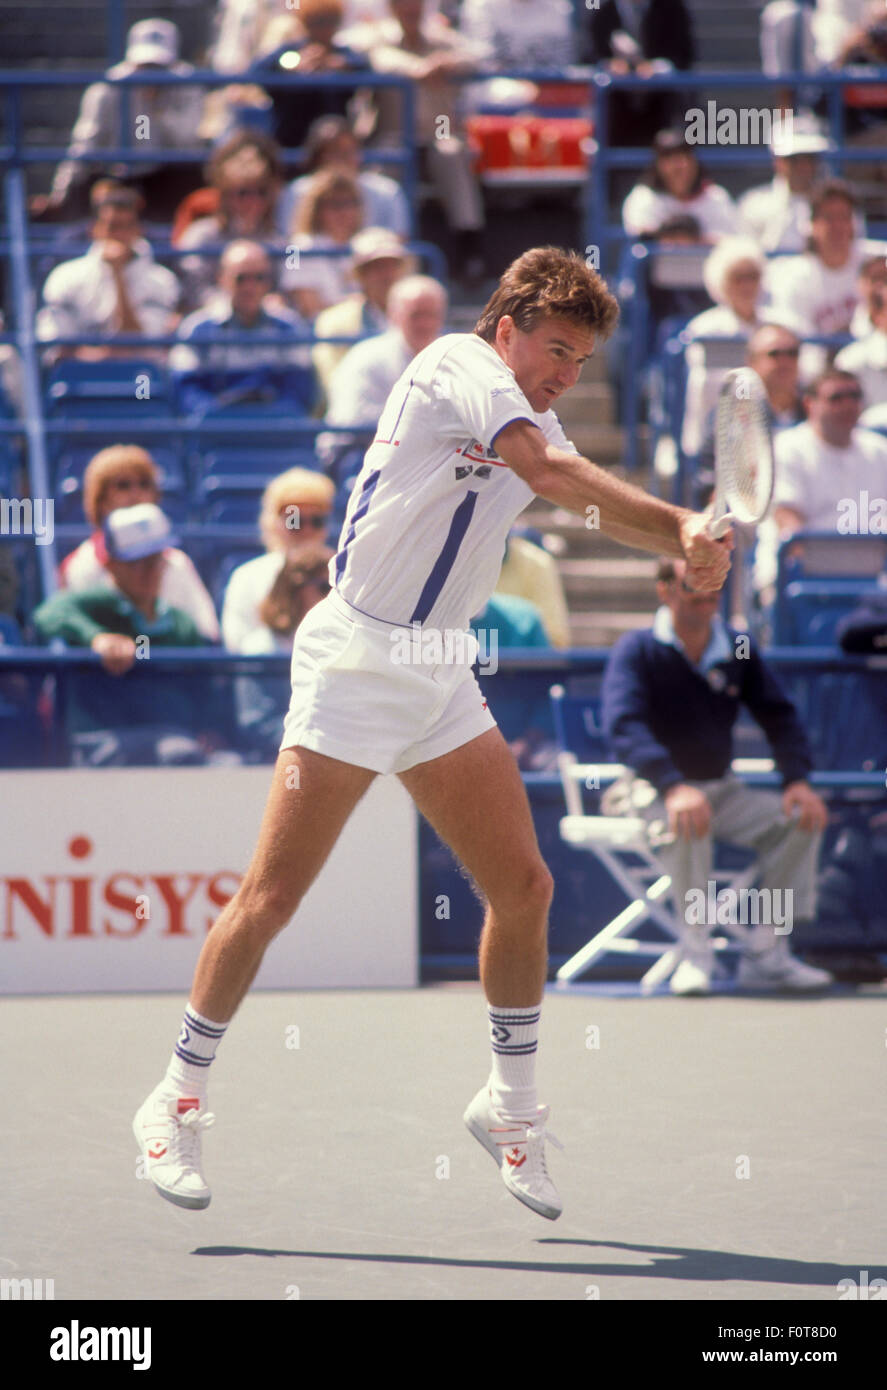 Jimmy Connors in action at the U.S. Open tennis tournament at Flushing Meadows Park in September 1988 Stock Photo